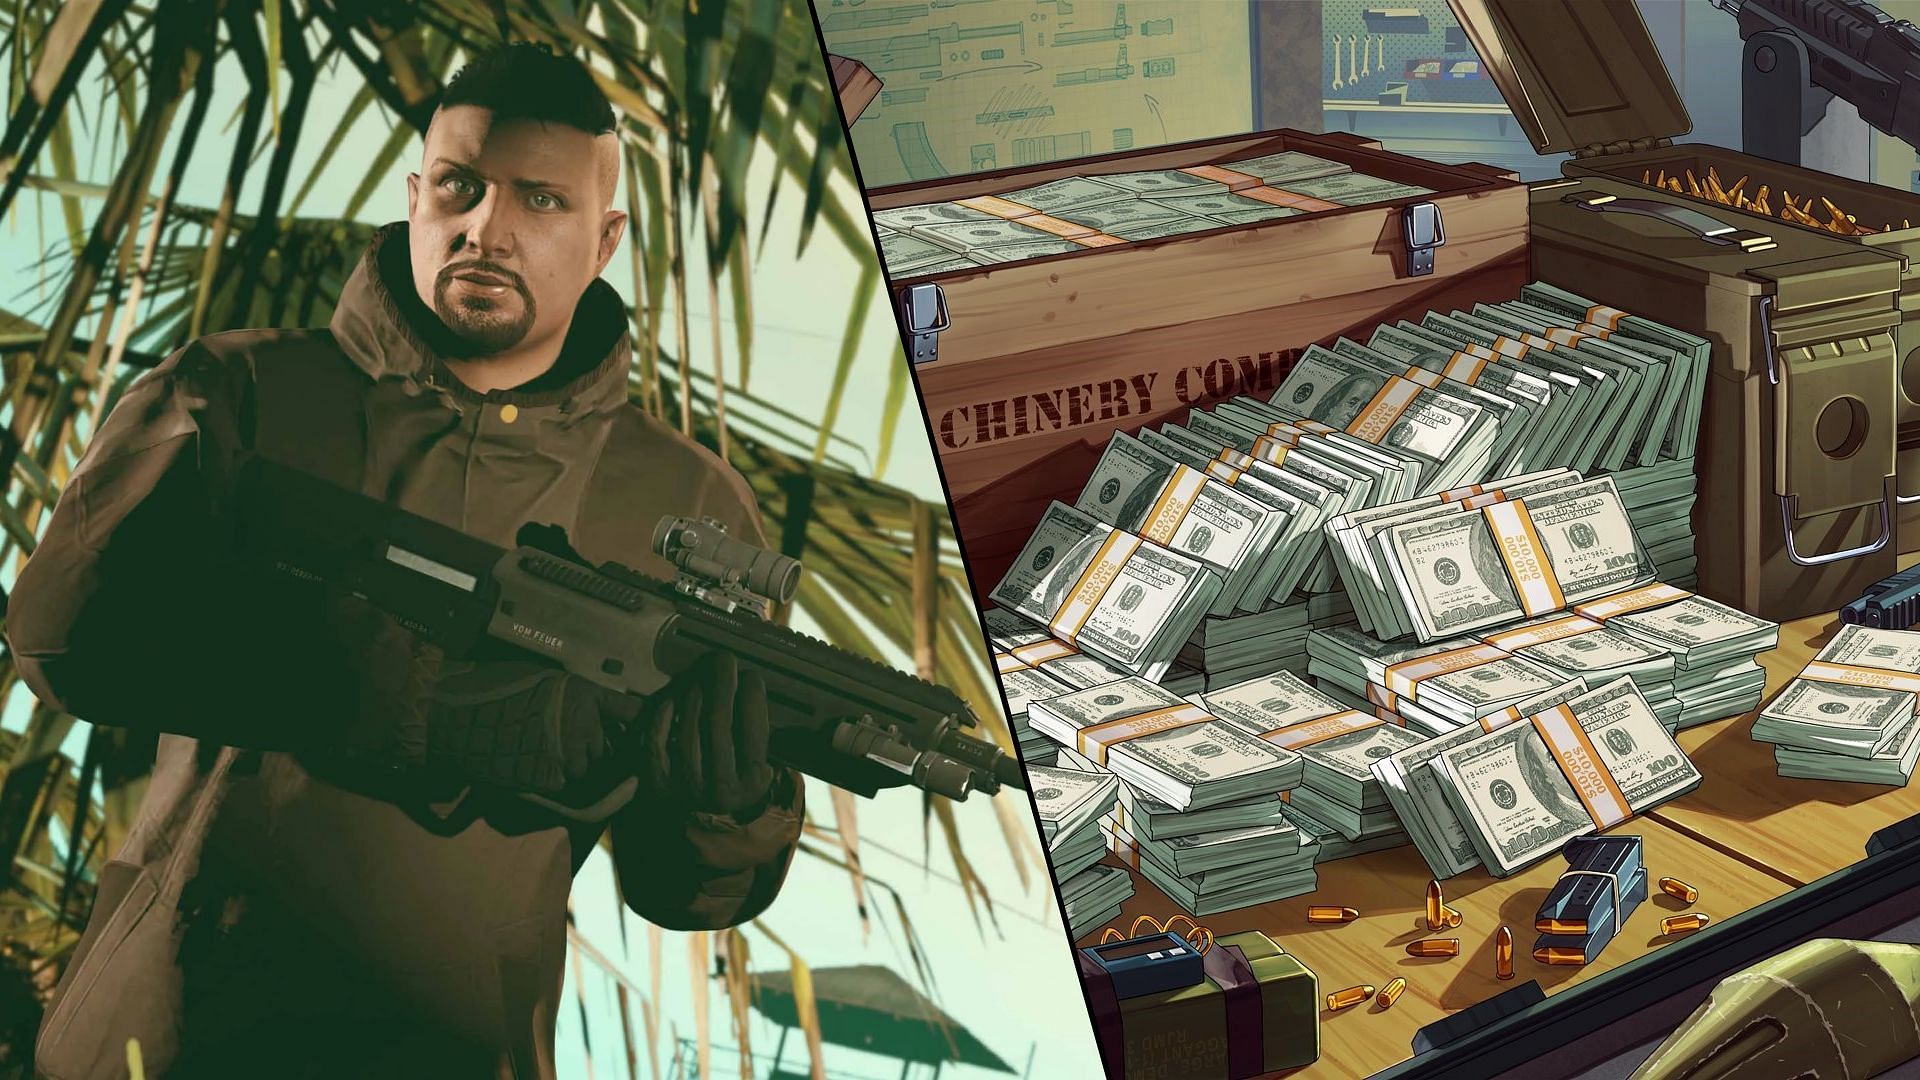 GTA Online players should ideally get to perform The Cayo Perico Heist as soon as possible (Image via Rockstar Games)